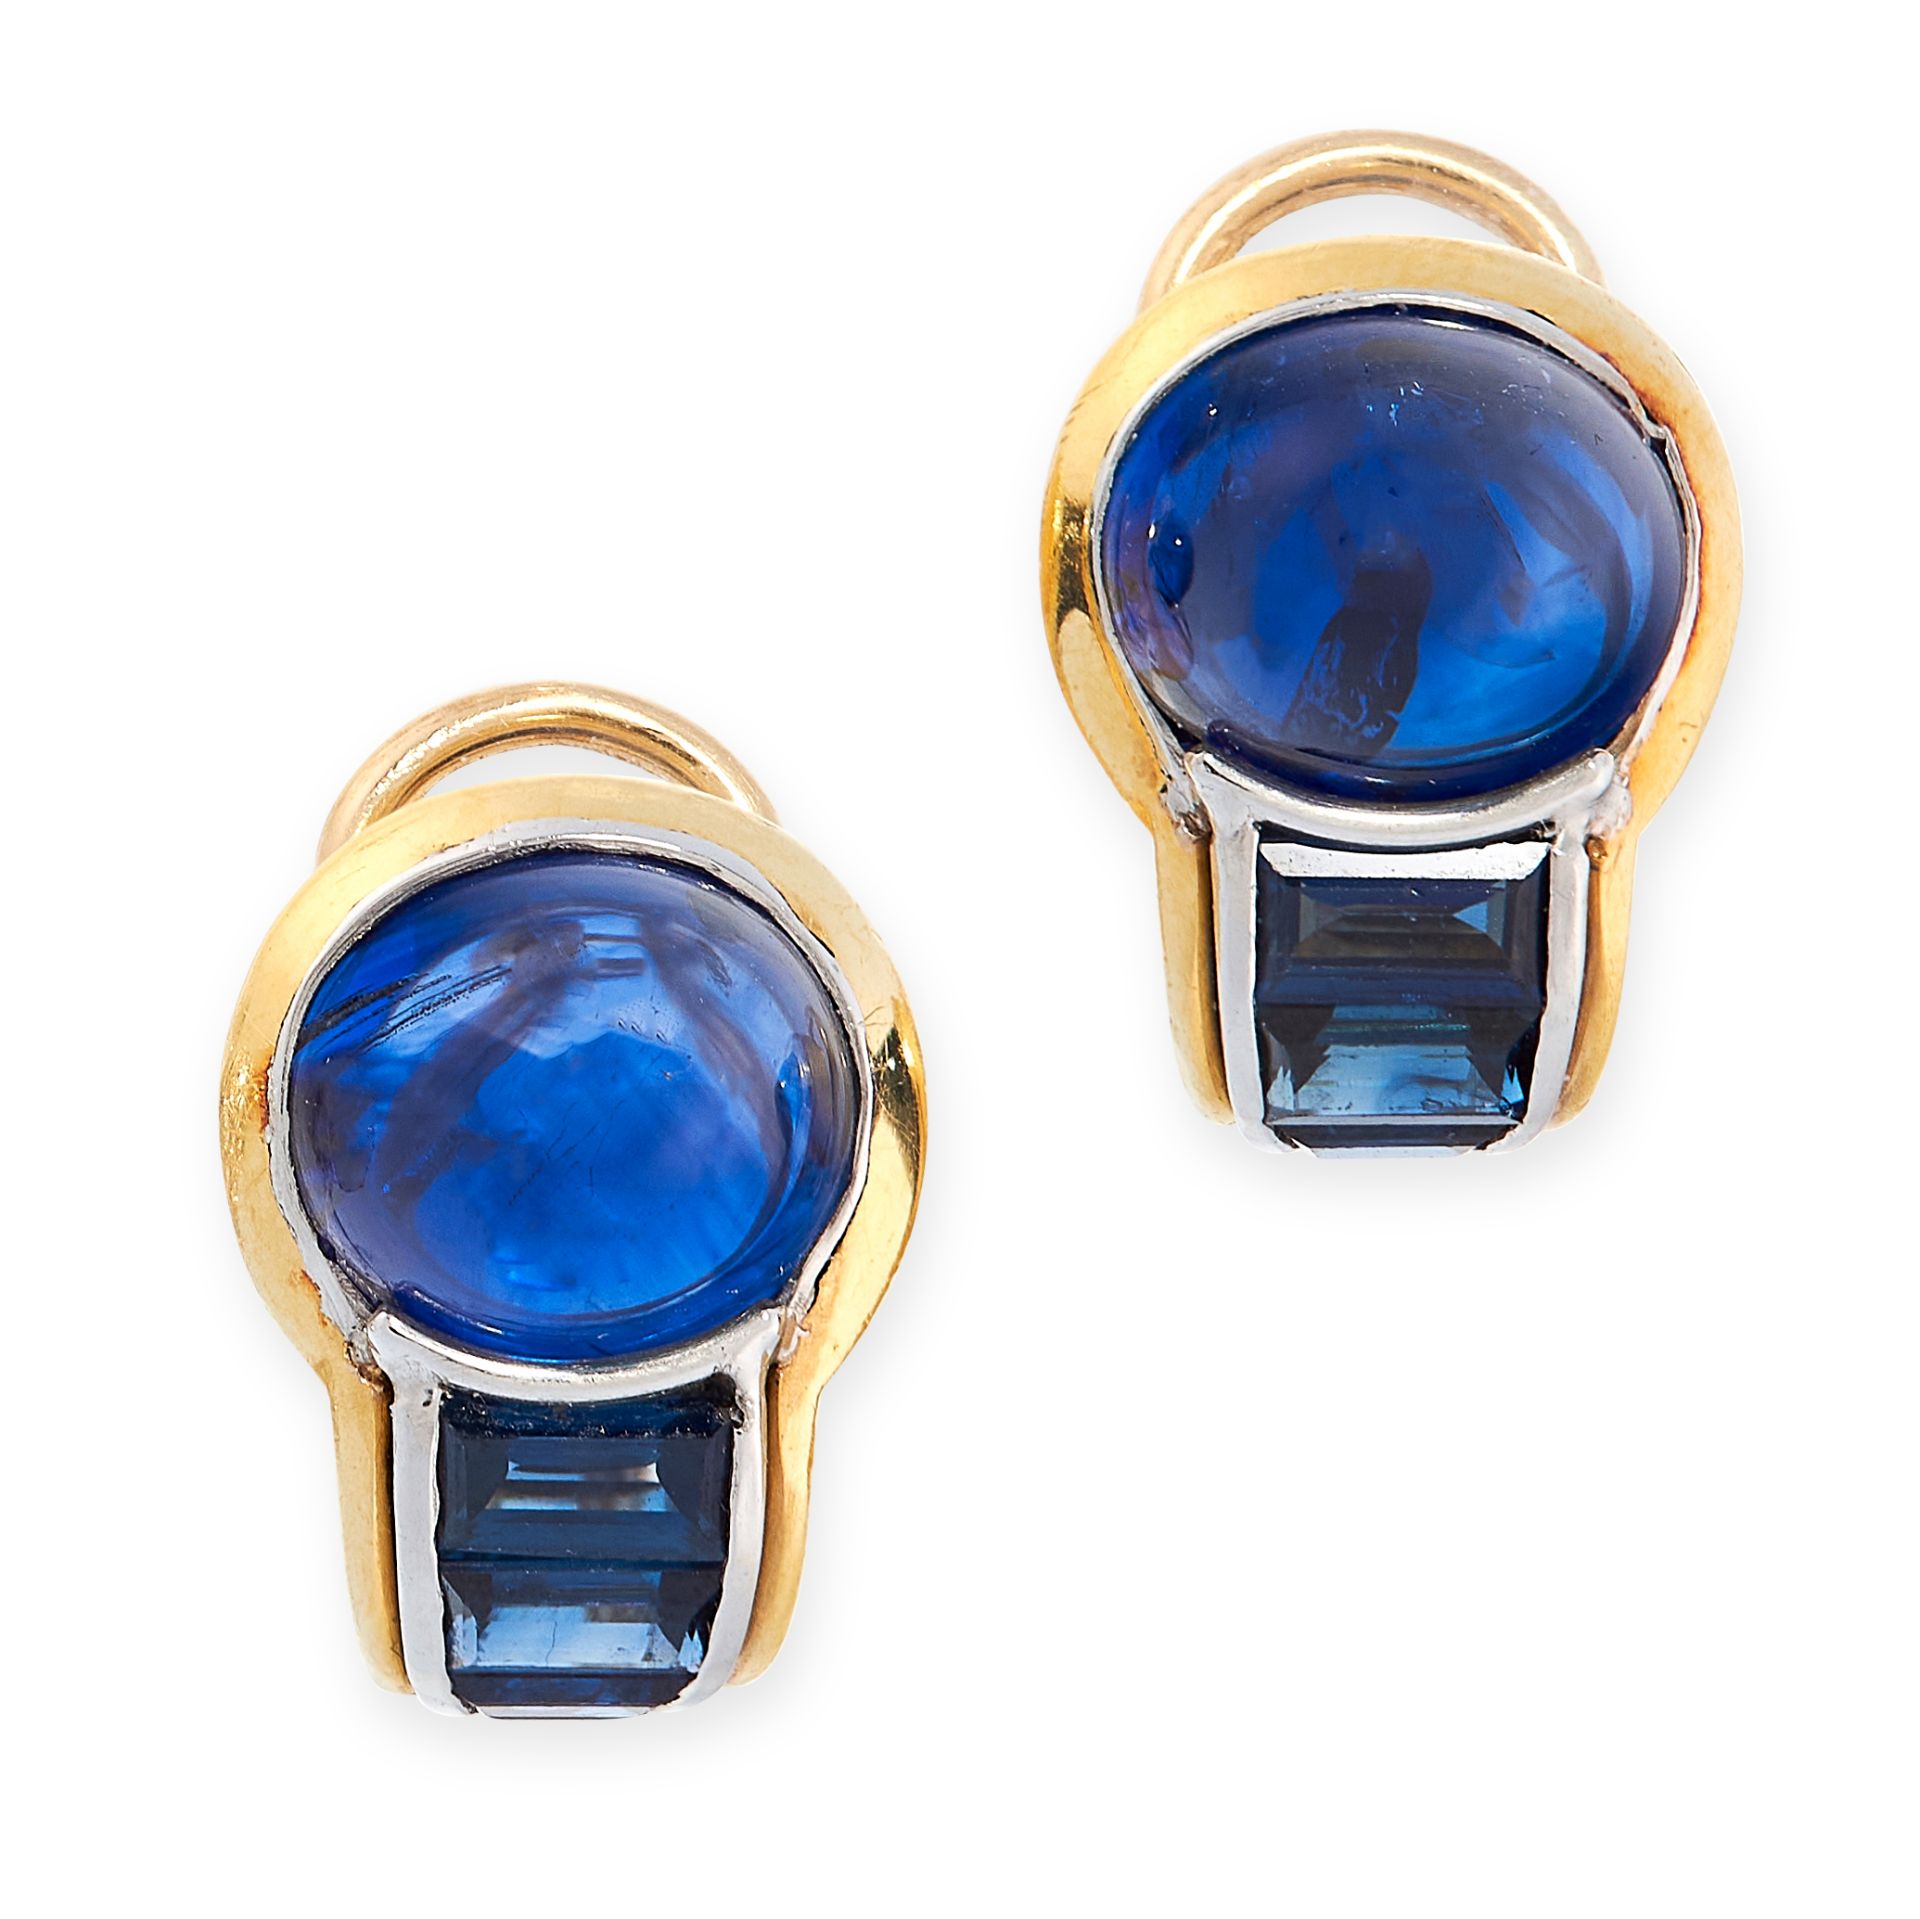 A PAIR OF SAPPHIRE CLIP EARRINGS, HEMMERLE in 18ct yellow gold and platinum, each set with a